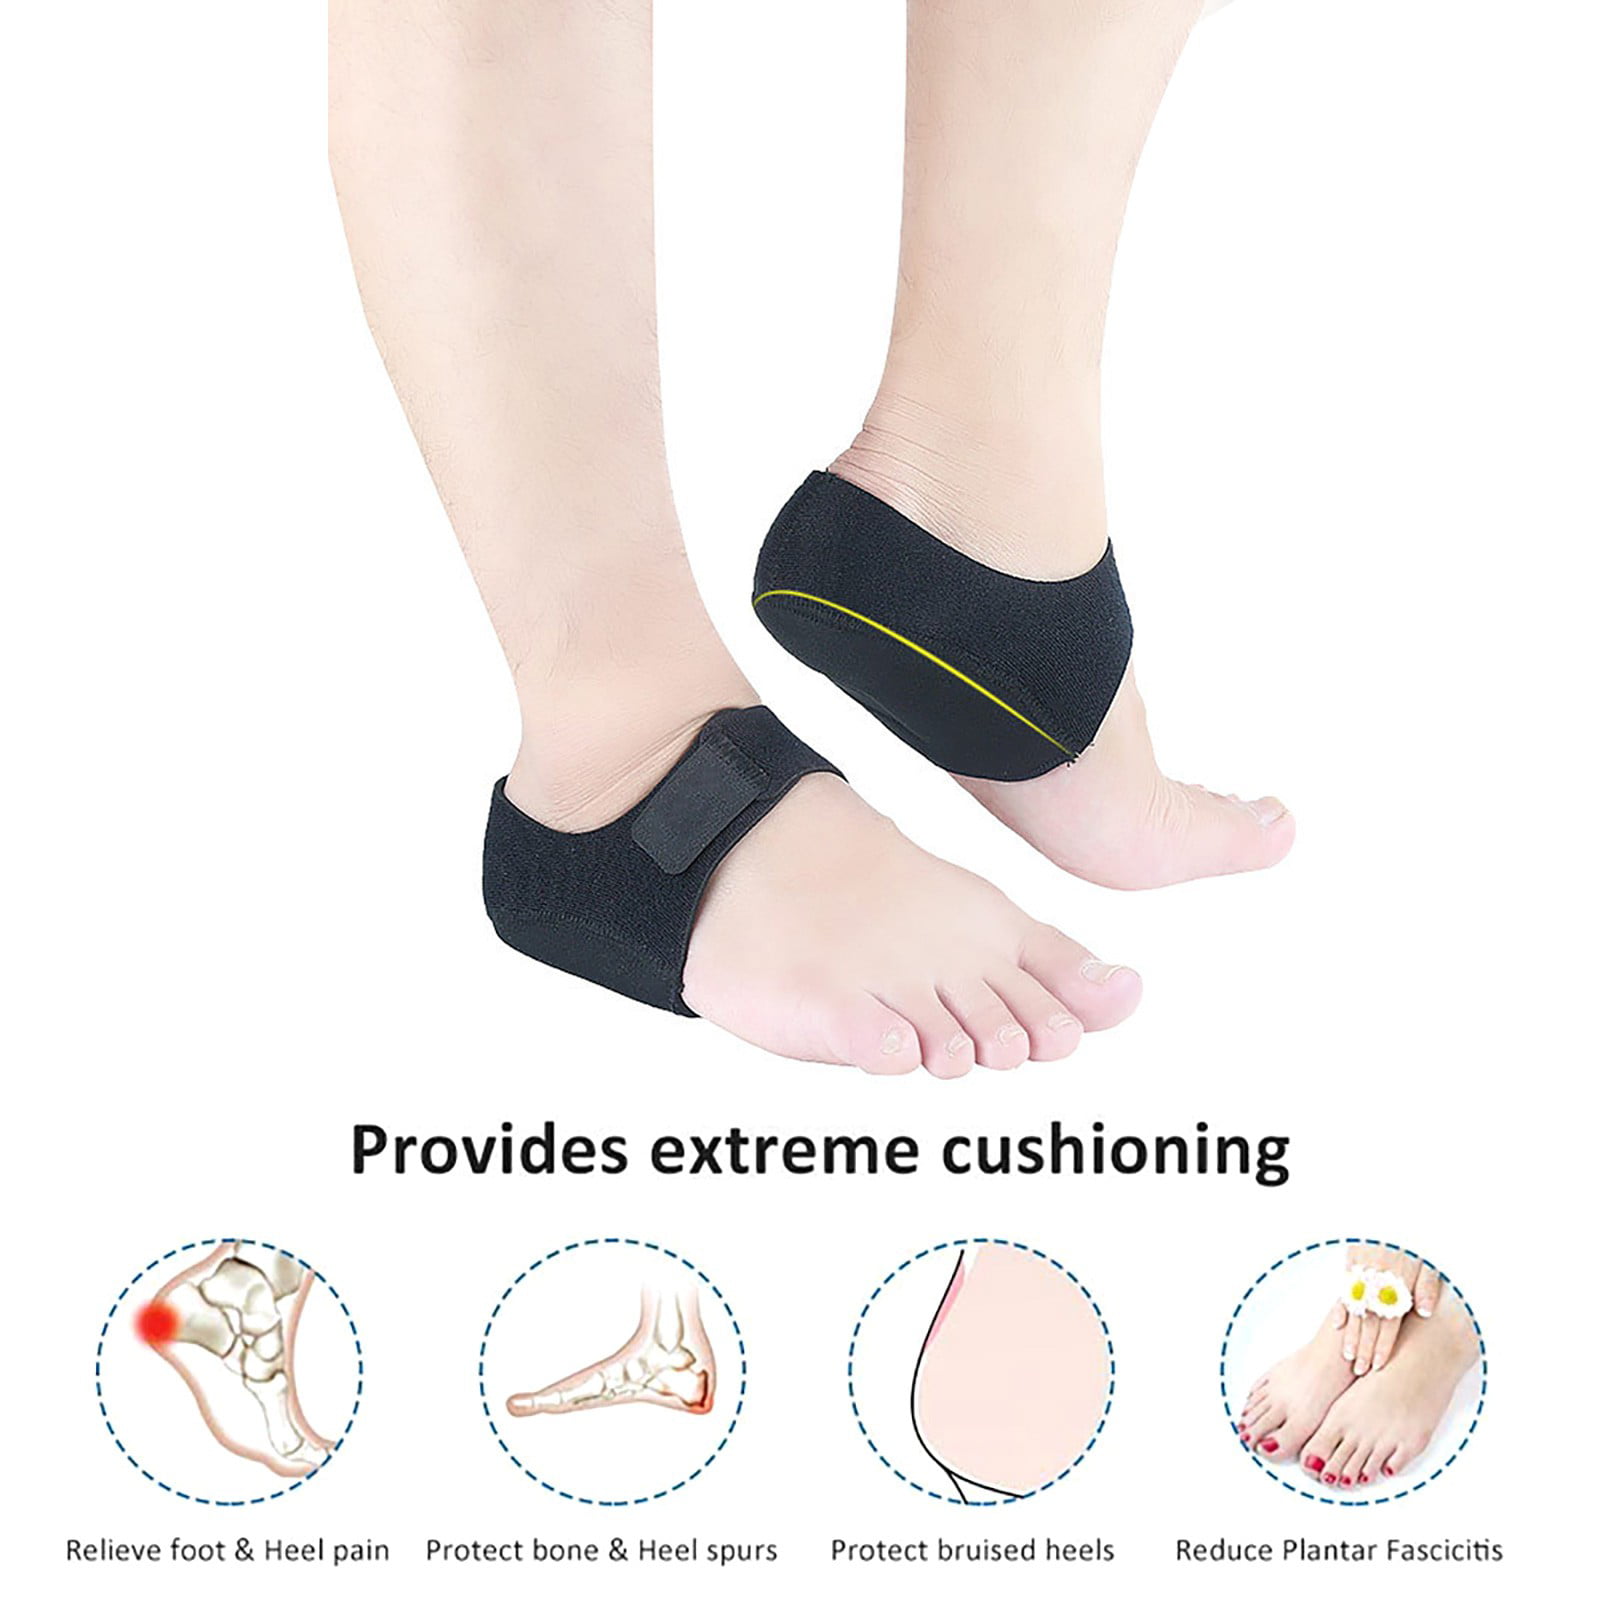 3/4 High Arch Support Inserts // Relieves Bunions, Plantar Fasciitis, Heel  Pain And Foot Pain Caused Only By High Arches - AliExpress